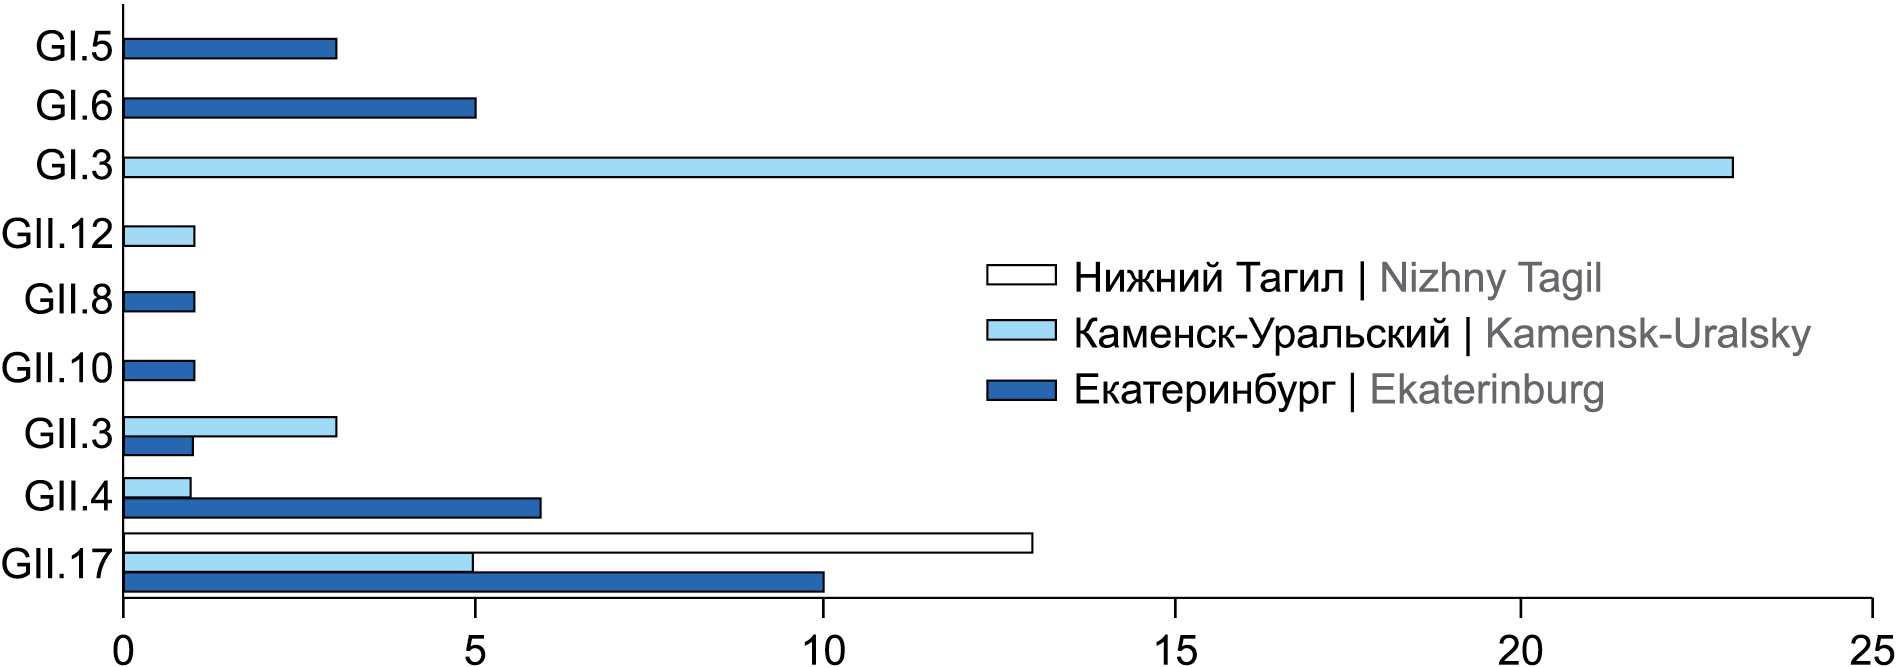 Genetic characterization and phylogenetic analysis of human norovirus infection in individual municipalities of the Sverdlovsk region in 2022